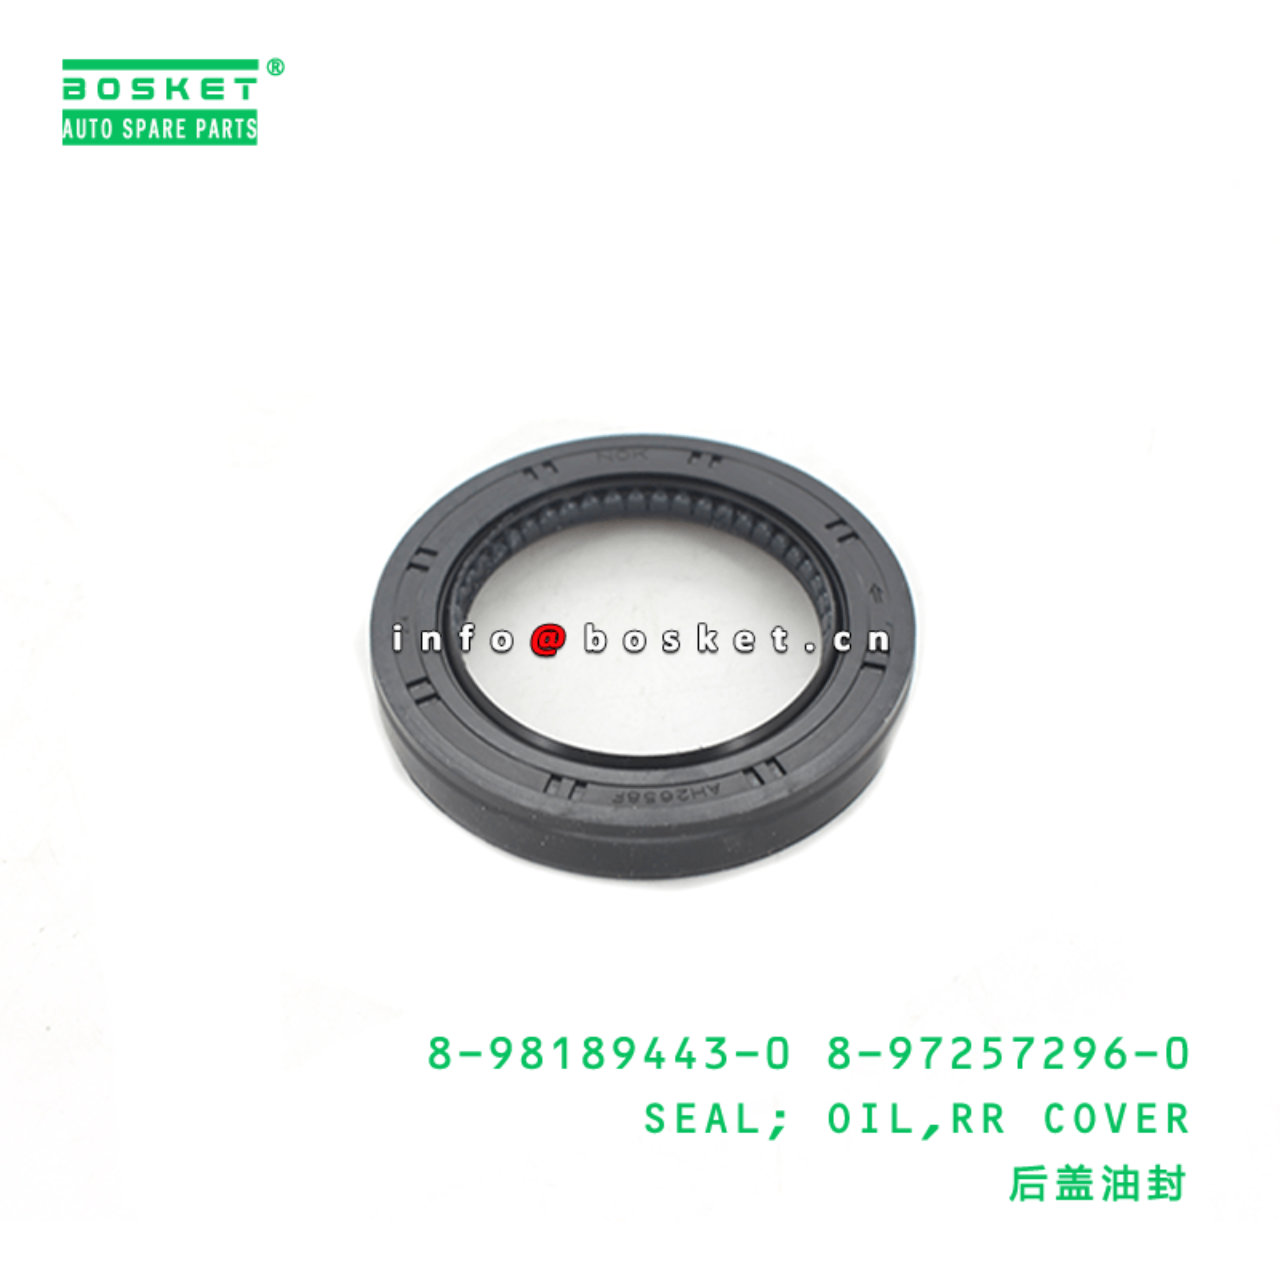 8-98189443-0 8-97257296-0 Rear Cover Oil Seal 8981894430 8972572960 Suitable for ISUZU NKR